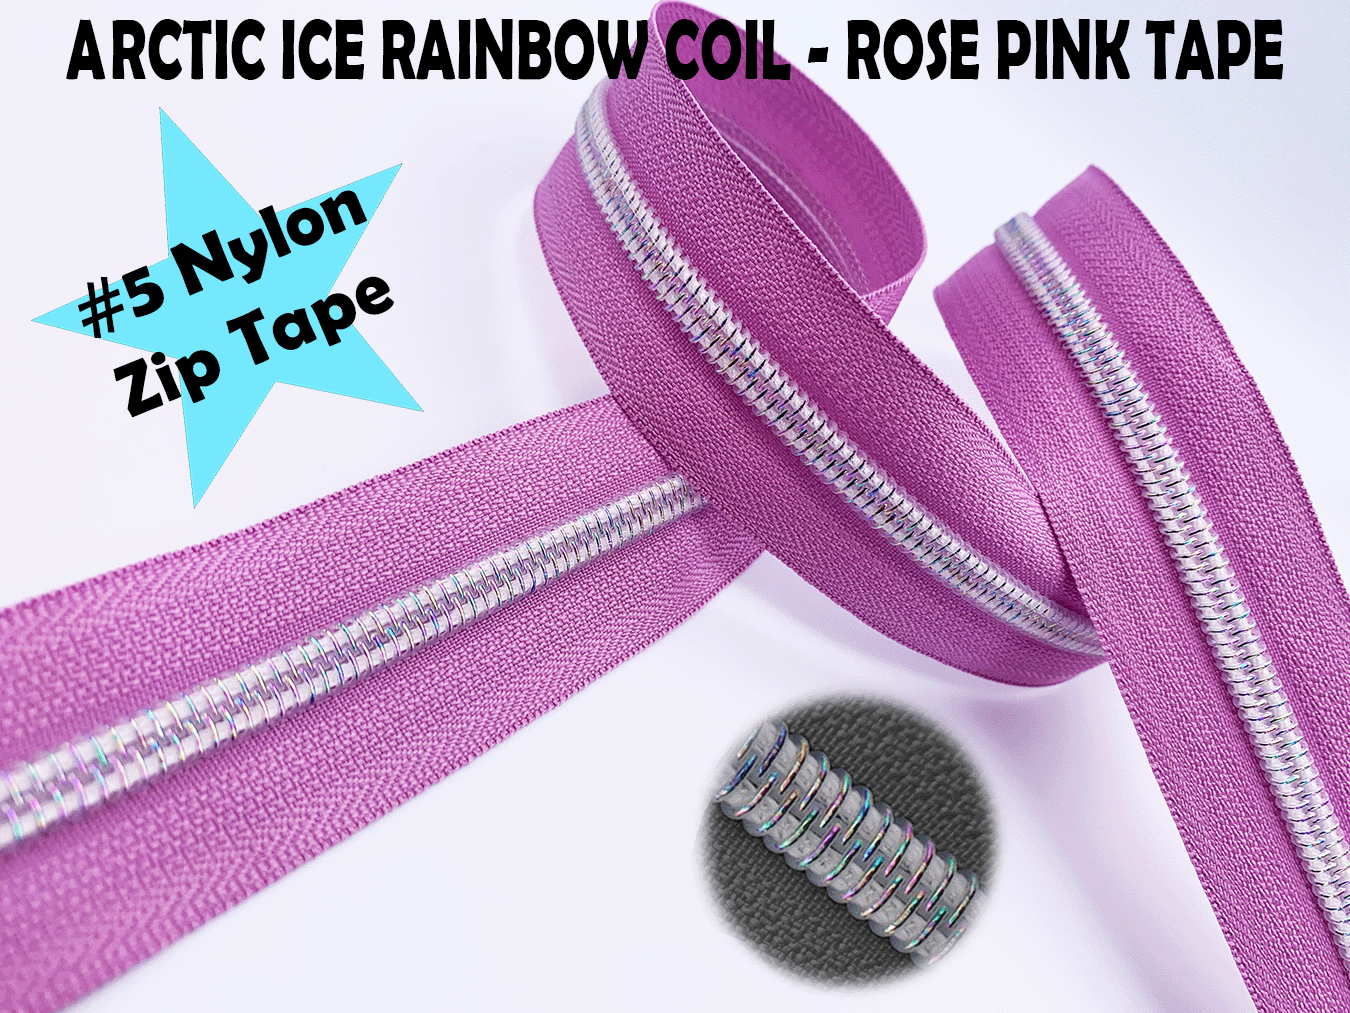 Rose Pink Zipper Tape with White Iridescent Rainbow Teeth, Arctic Ice Collection, for #5 nylon zips